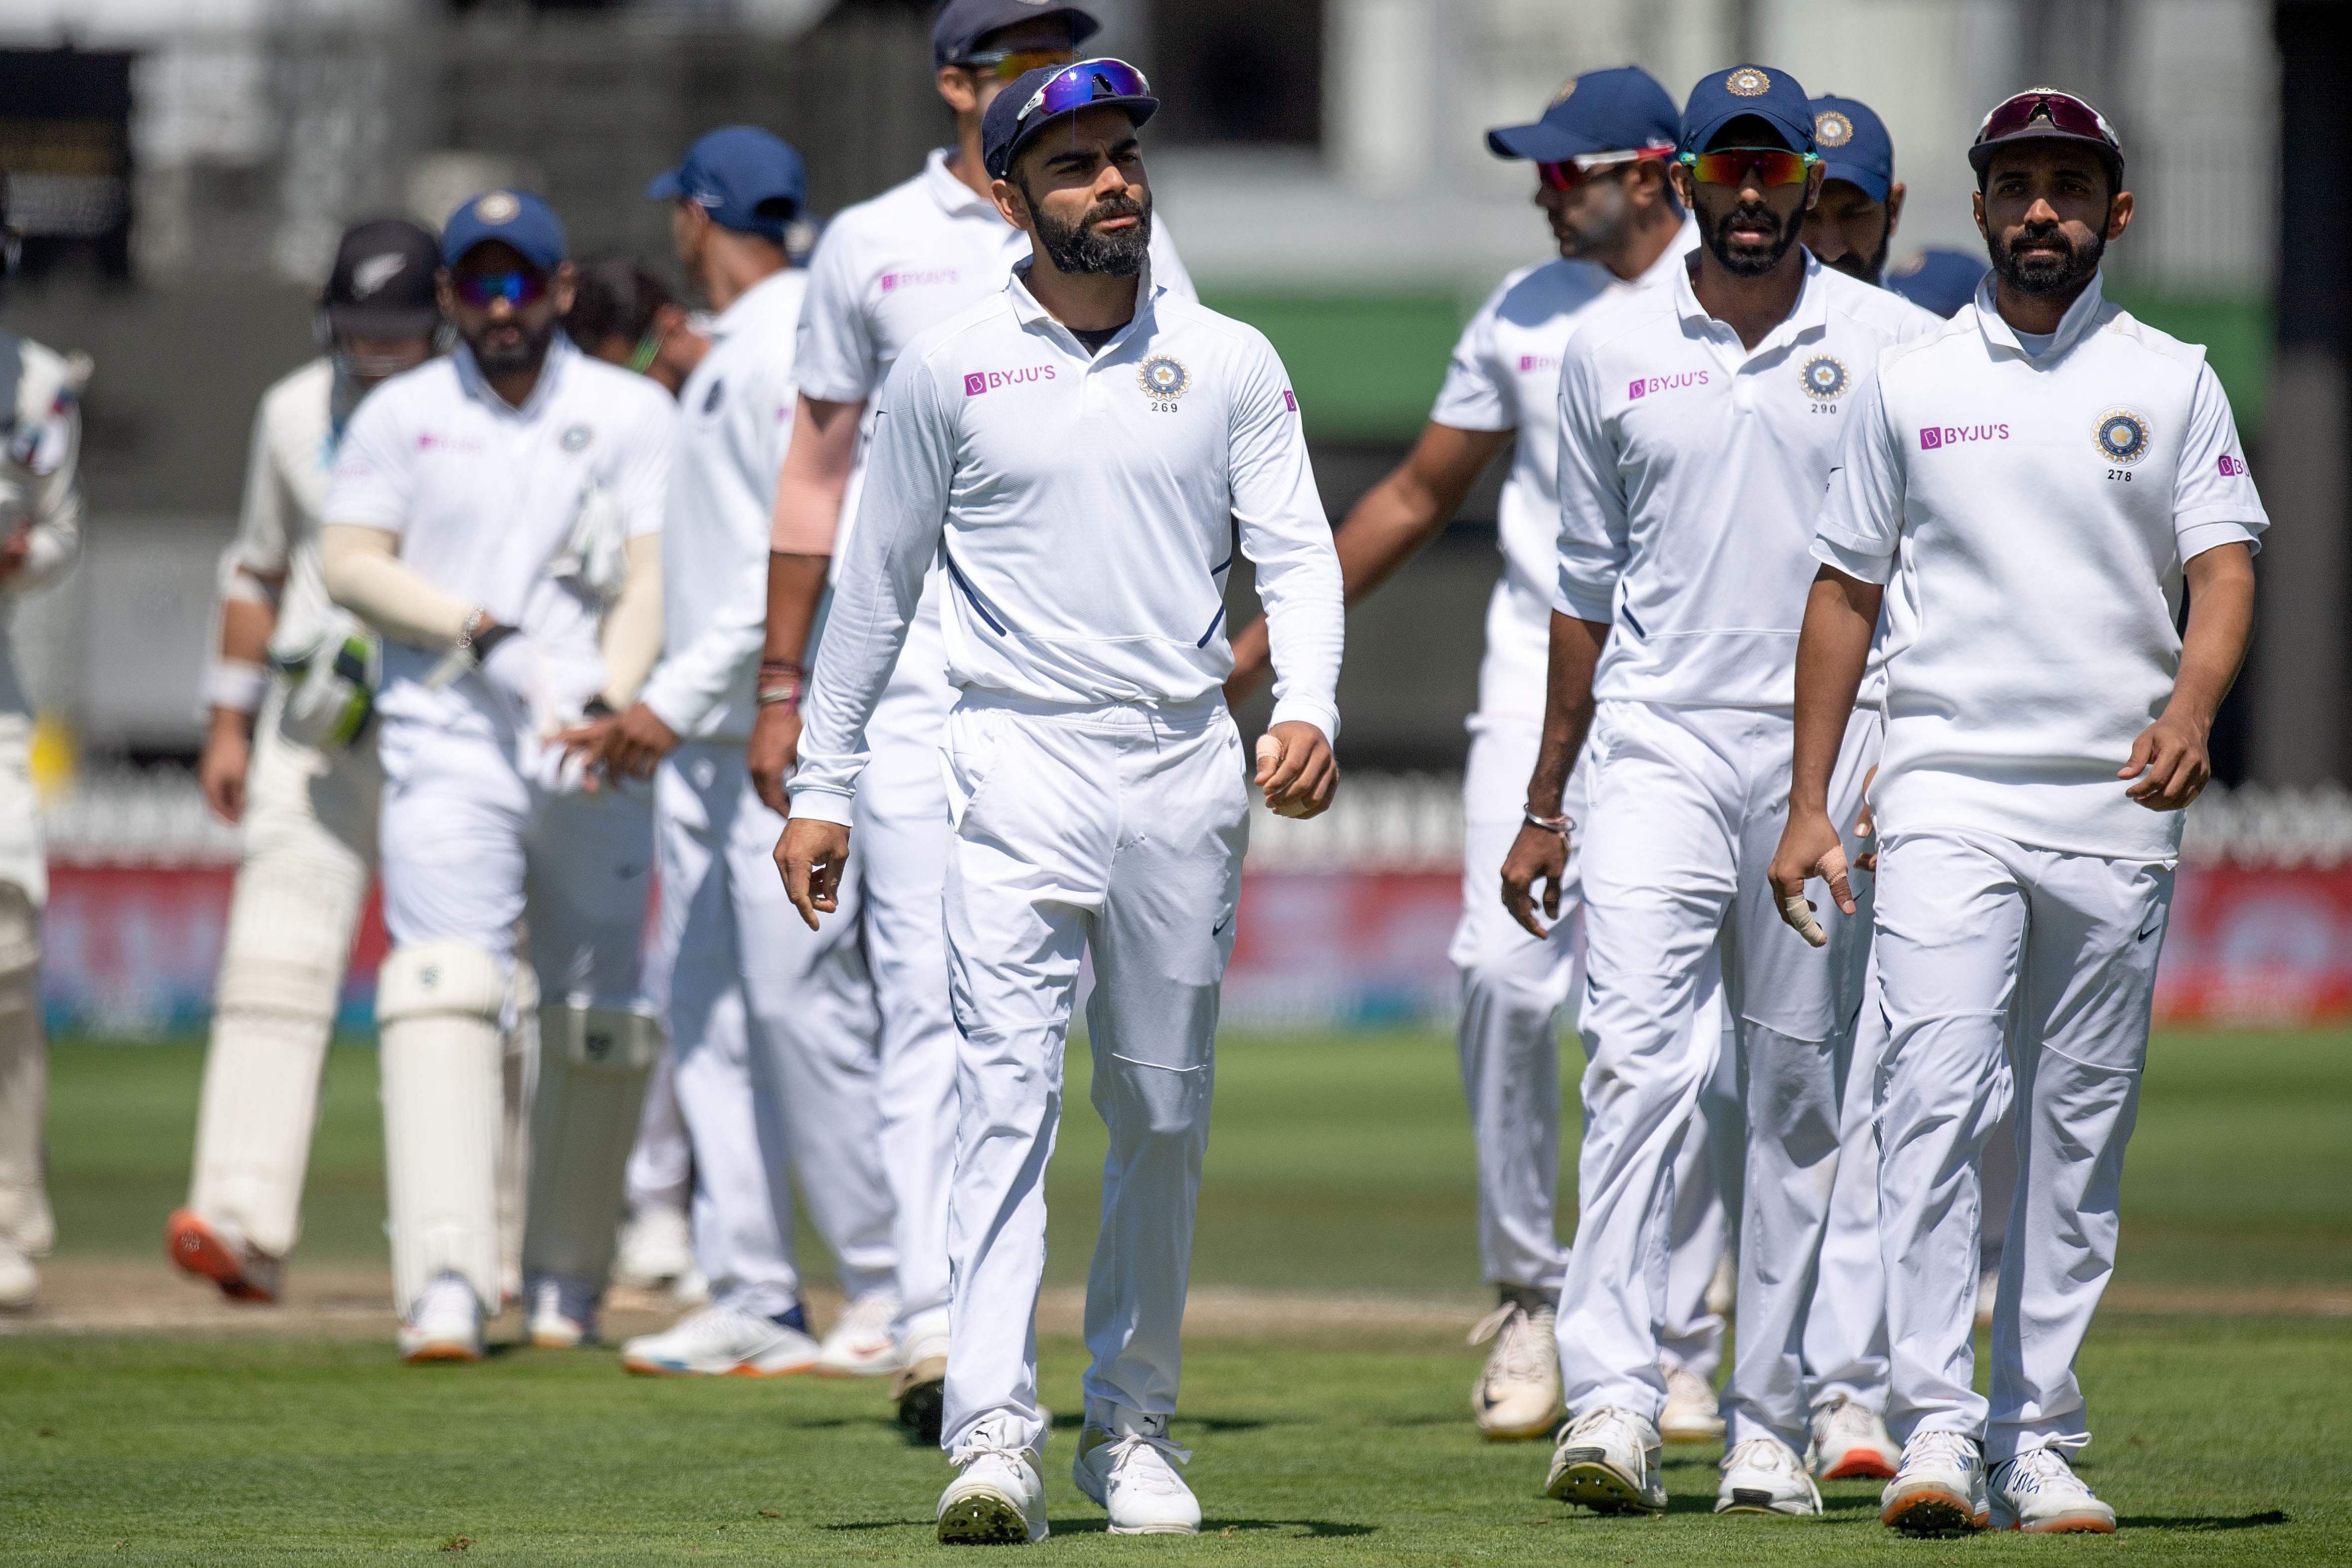 India's captain Virat Kohli (C) walks from the field with his team after losing the match to New Zealand during day four of the first Test cricket match between New Zealand and India at the Basin Reserve in Wellington. (AFP Photo)